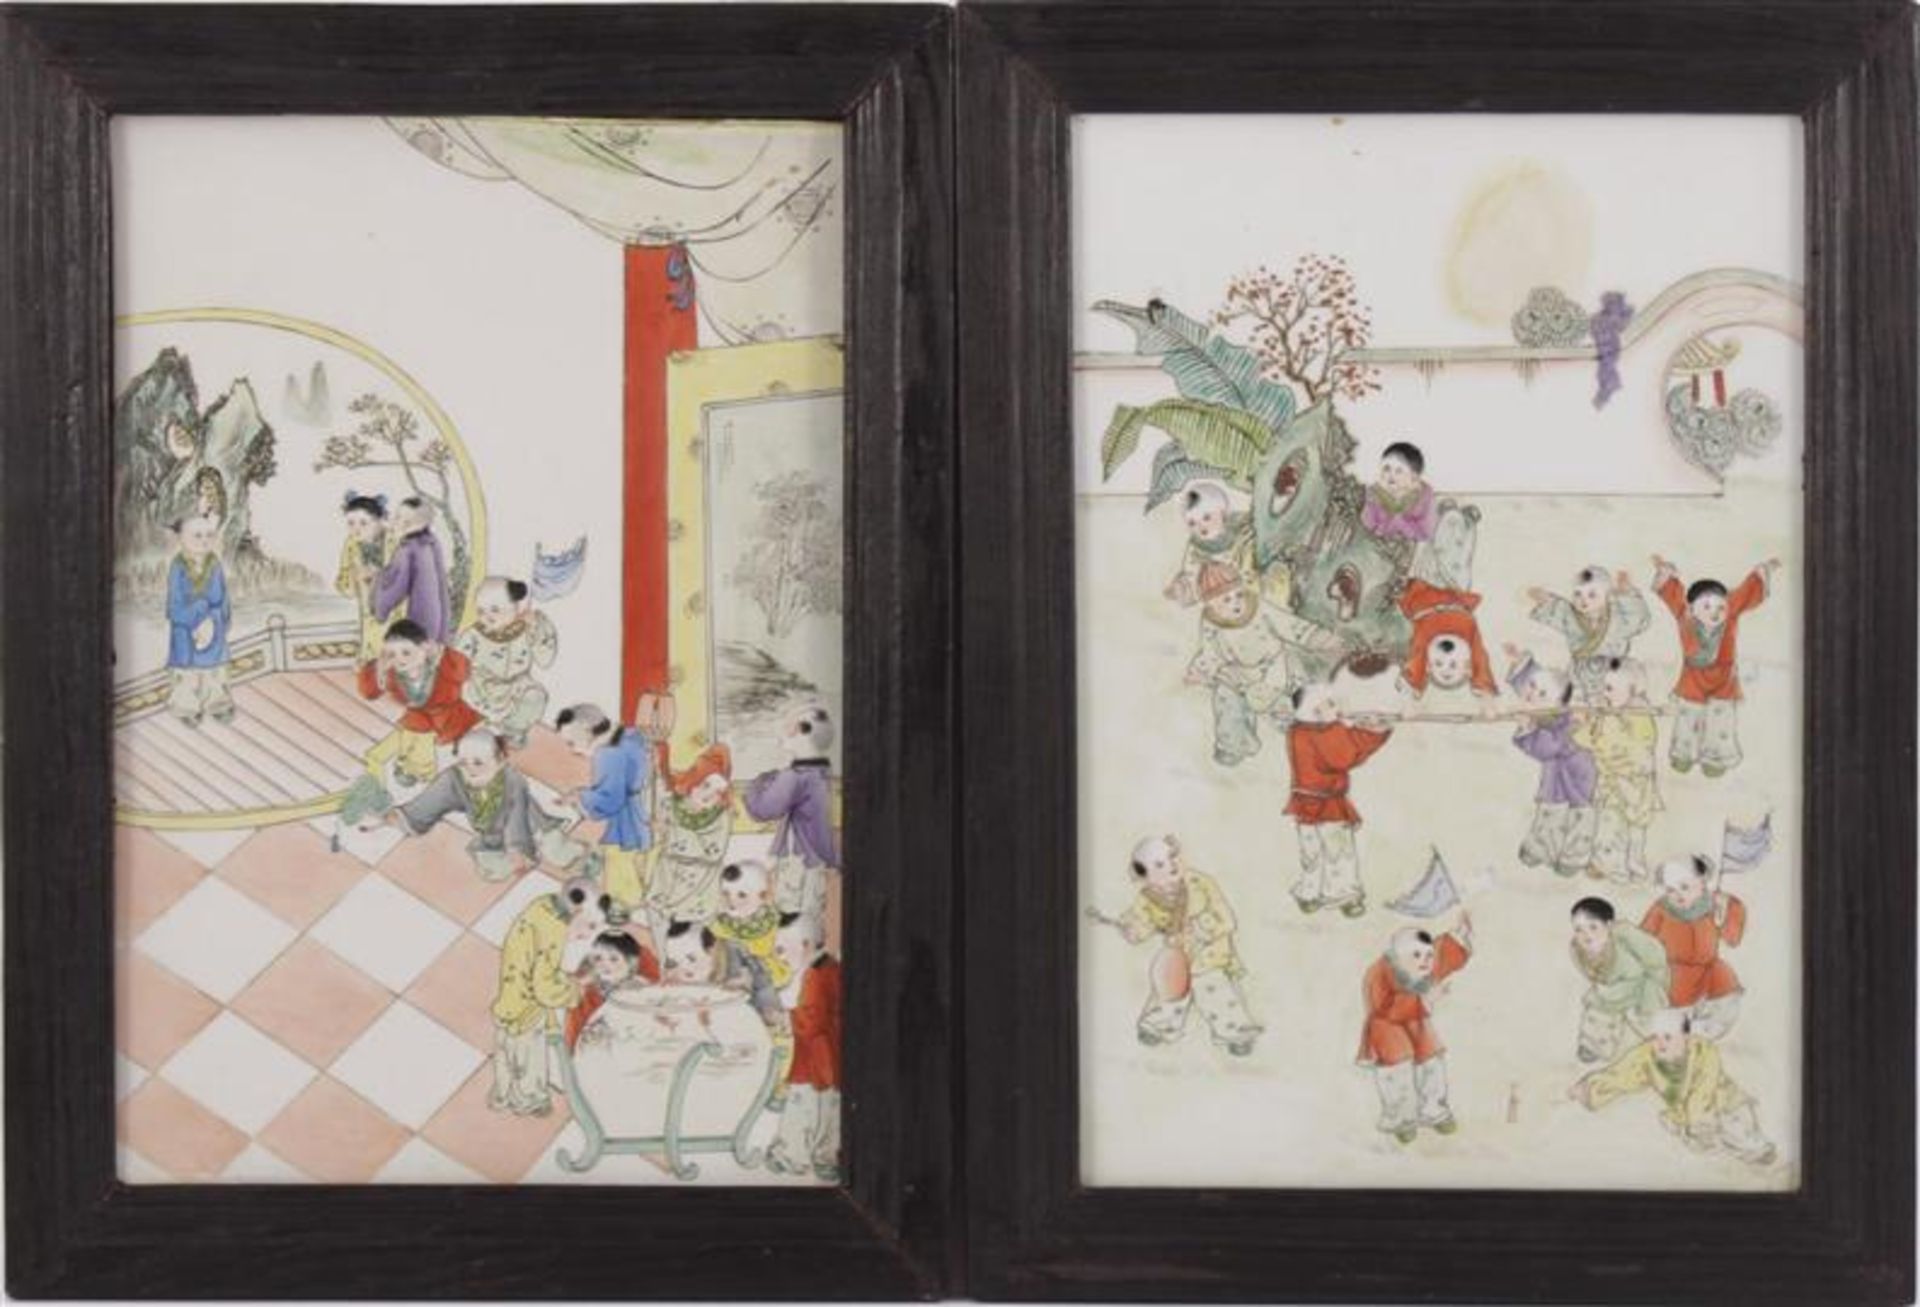 2 porcelain tiles with polychrome decoration of playing children, in wooden frame, outer size